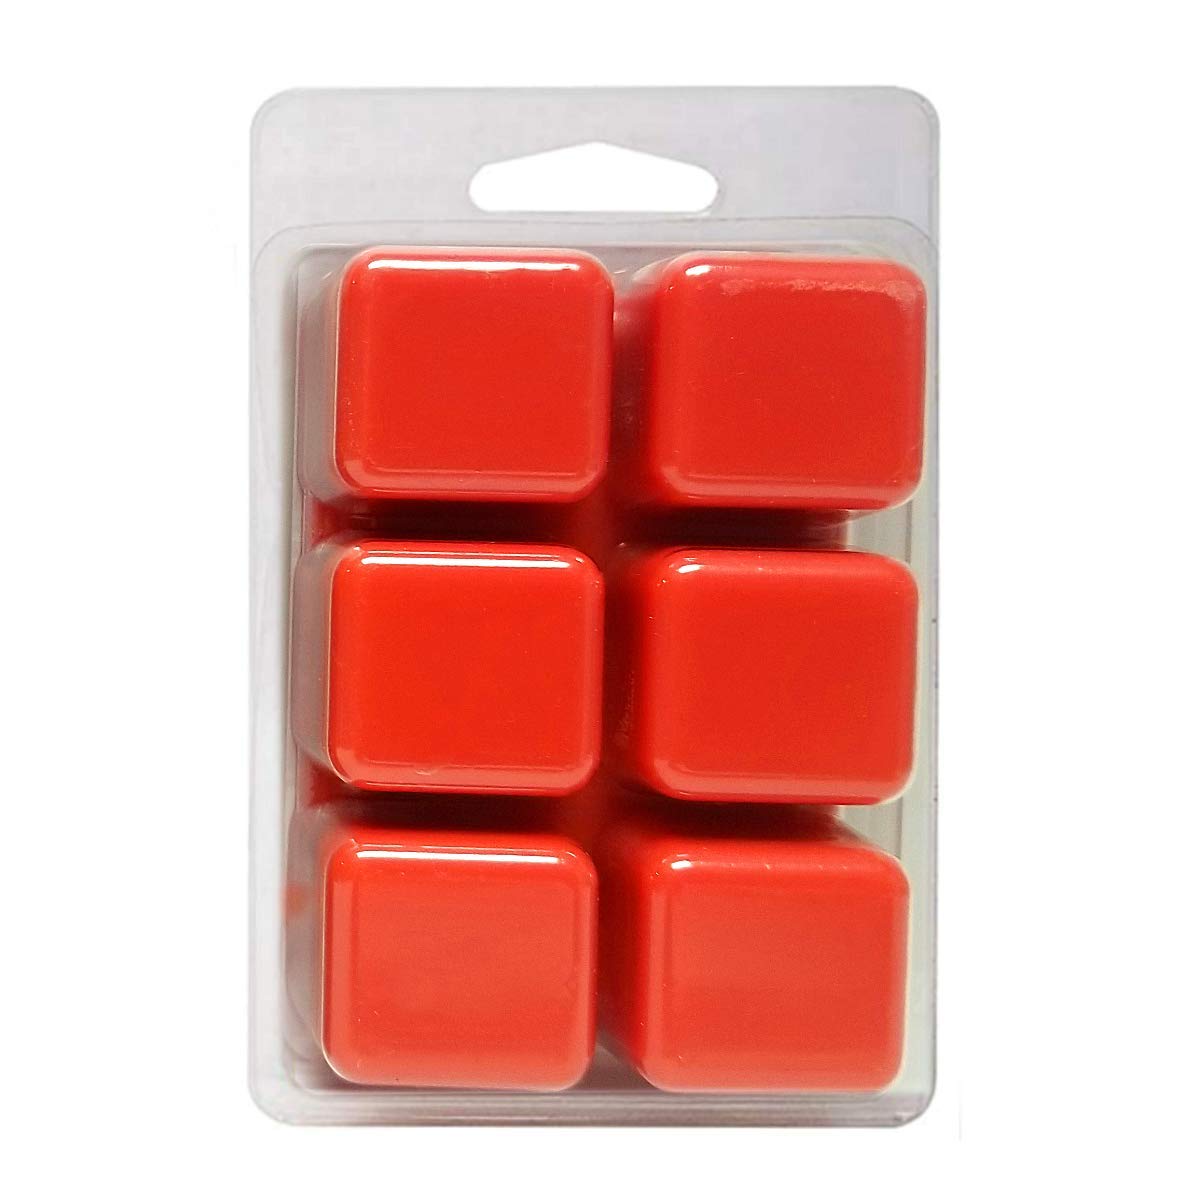 Fresh Squeezed Oranges - 3.2 oz Clamshell